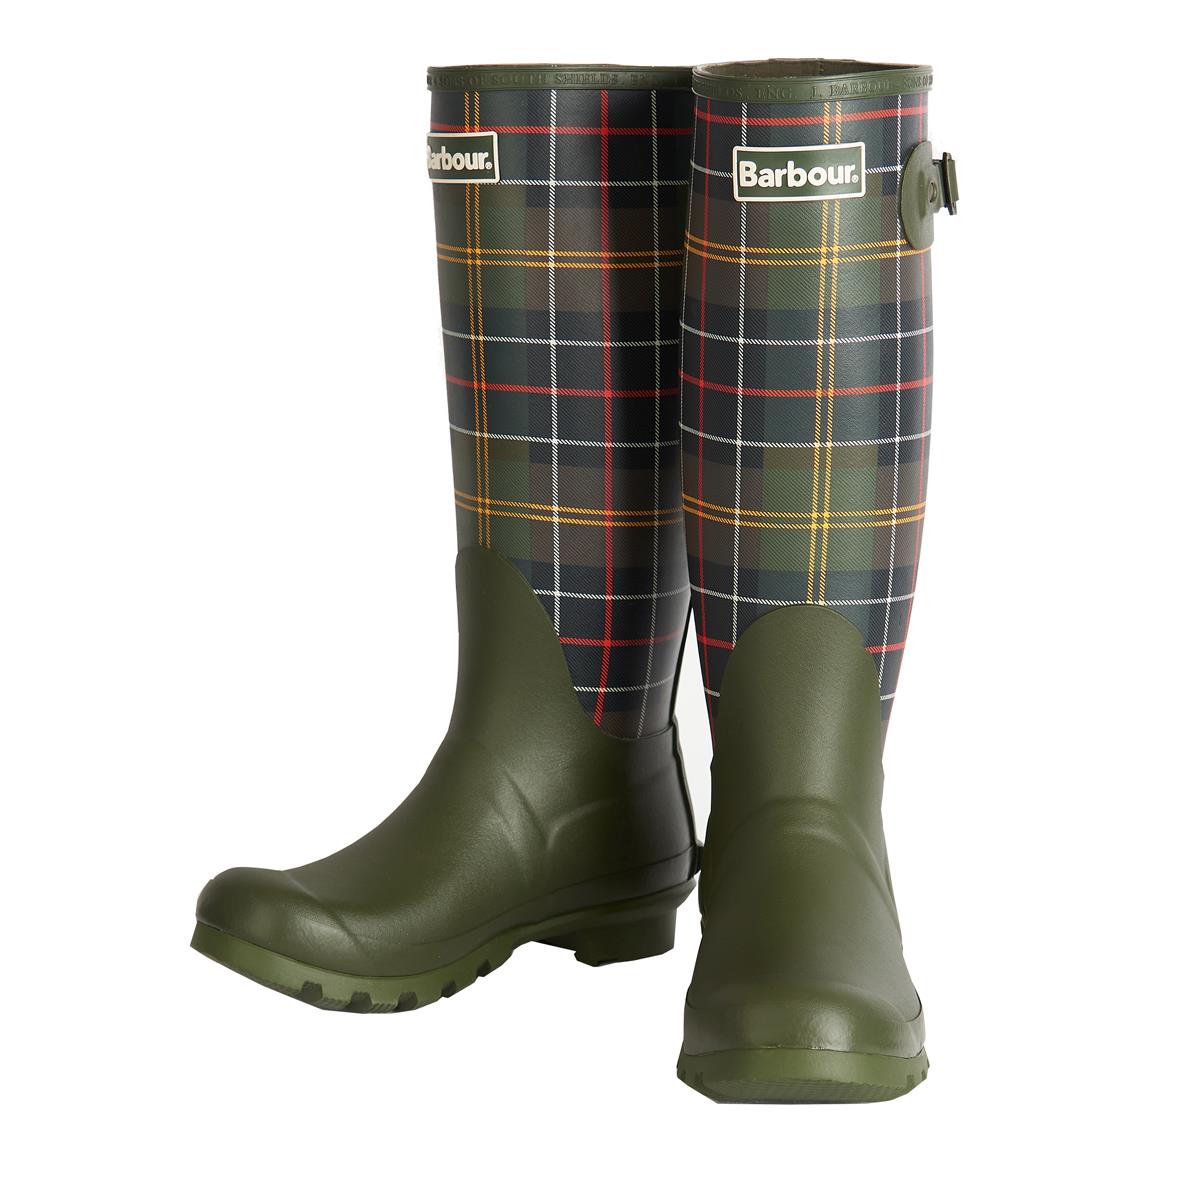 Where are these Barbour tartan wellies made?